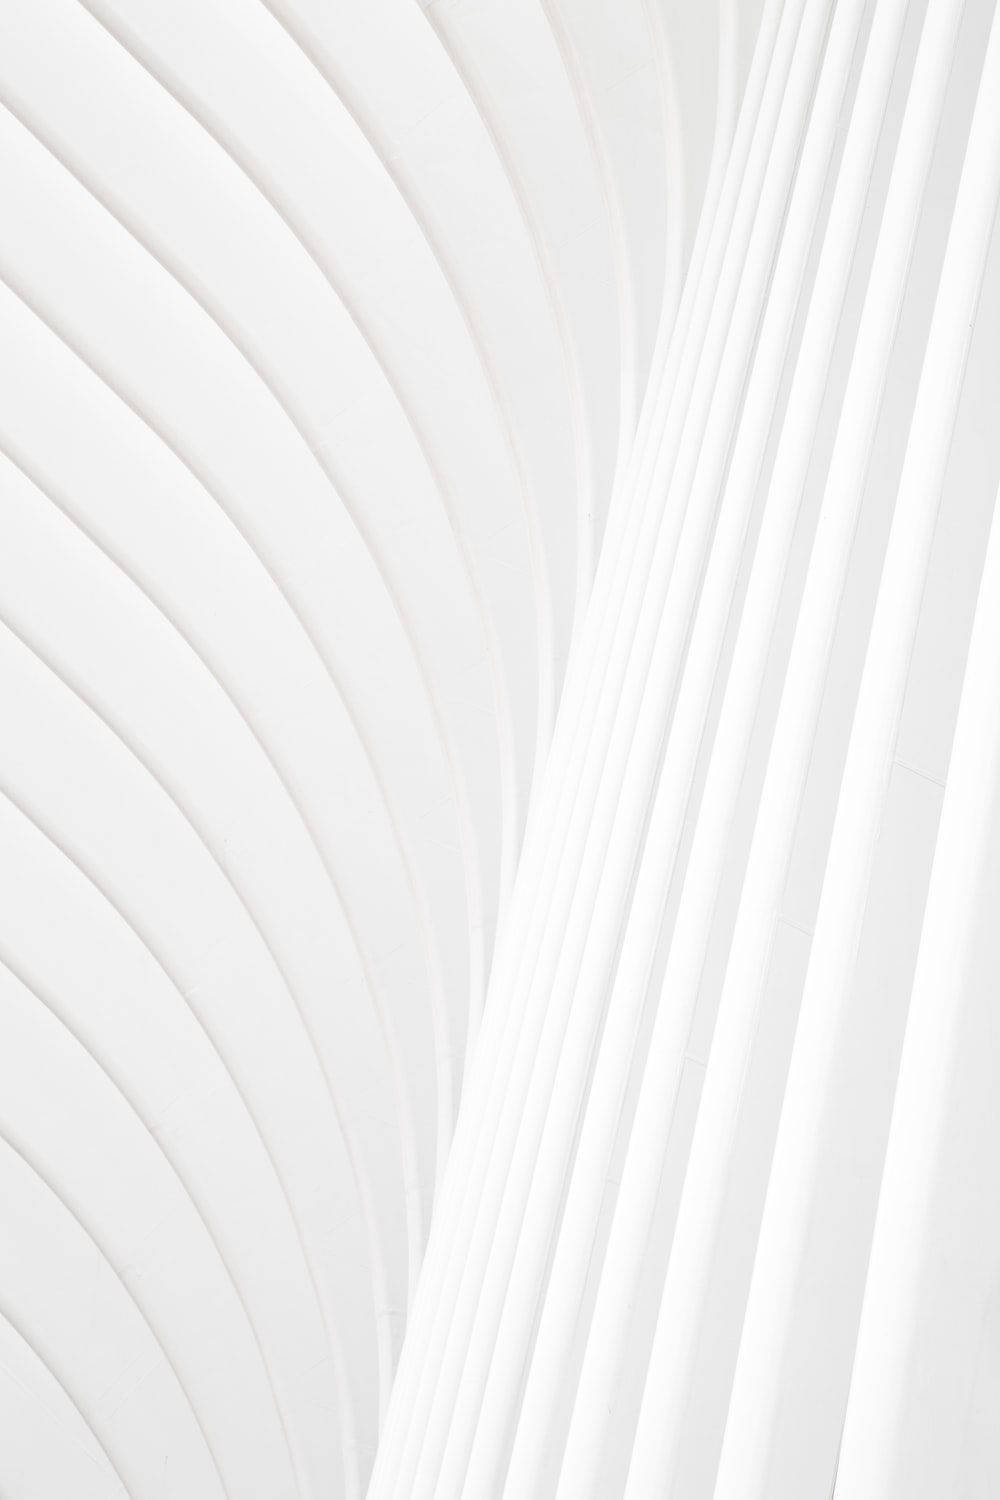 White Full Screen With Waves Wallpaper